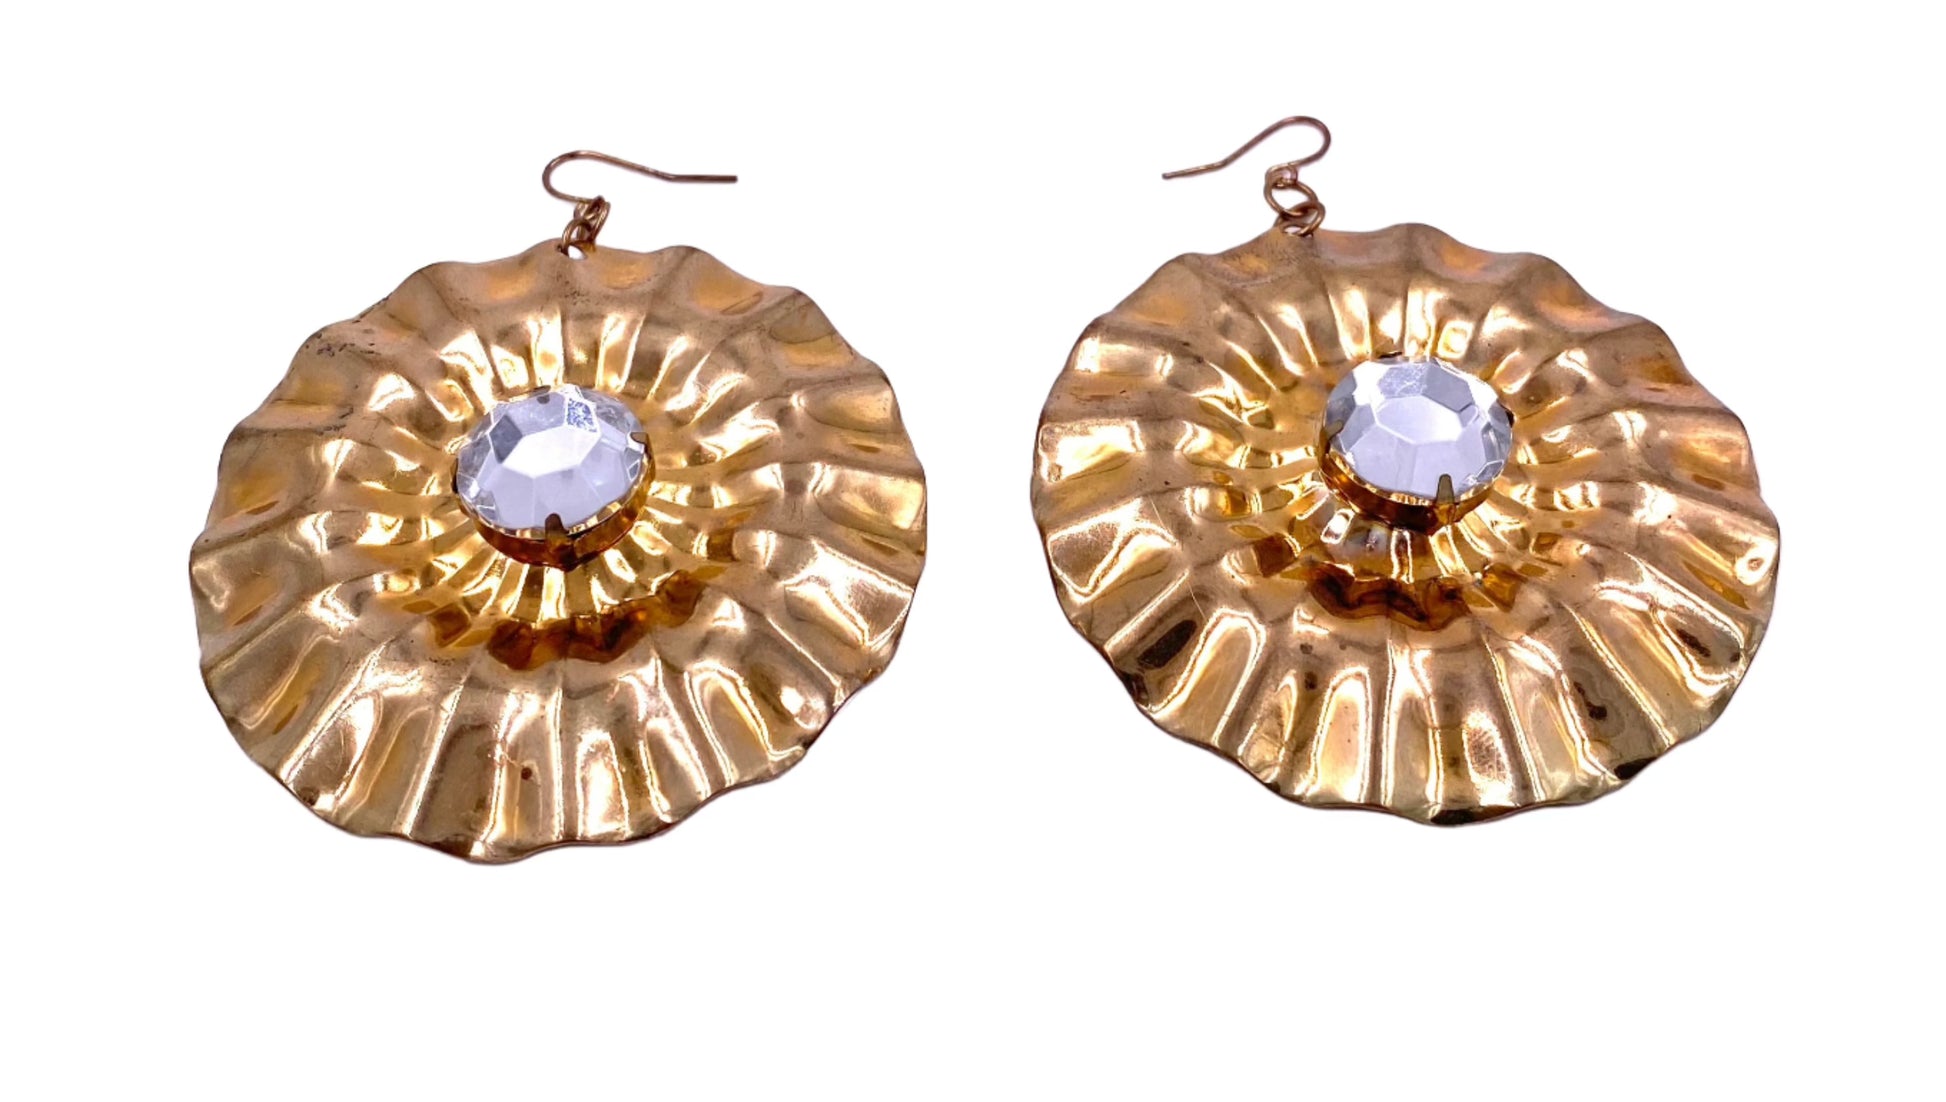 Vintage Large Round Gold Earrings with Large Center Crystal